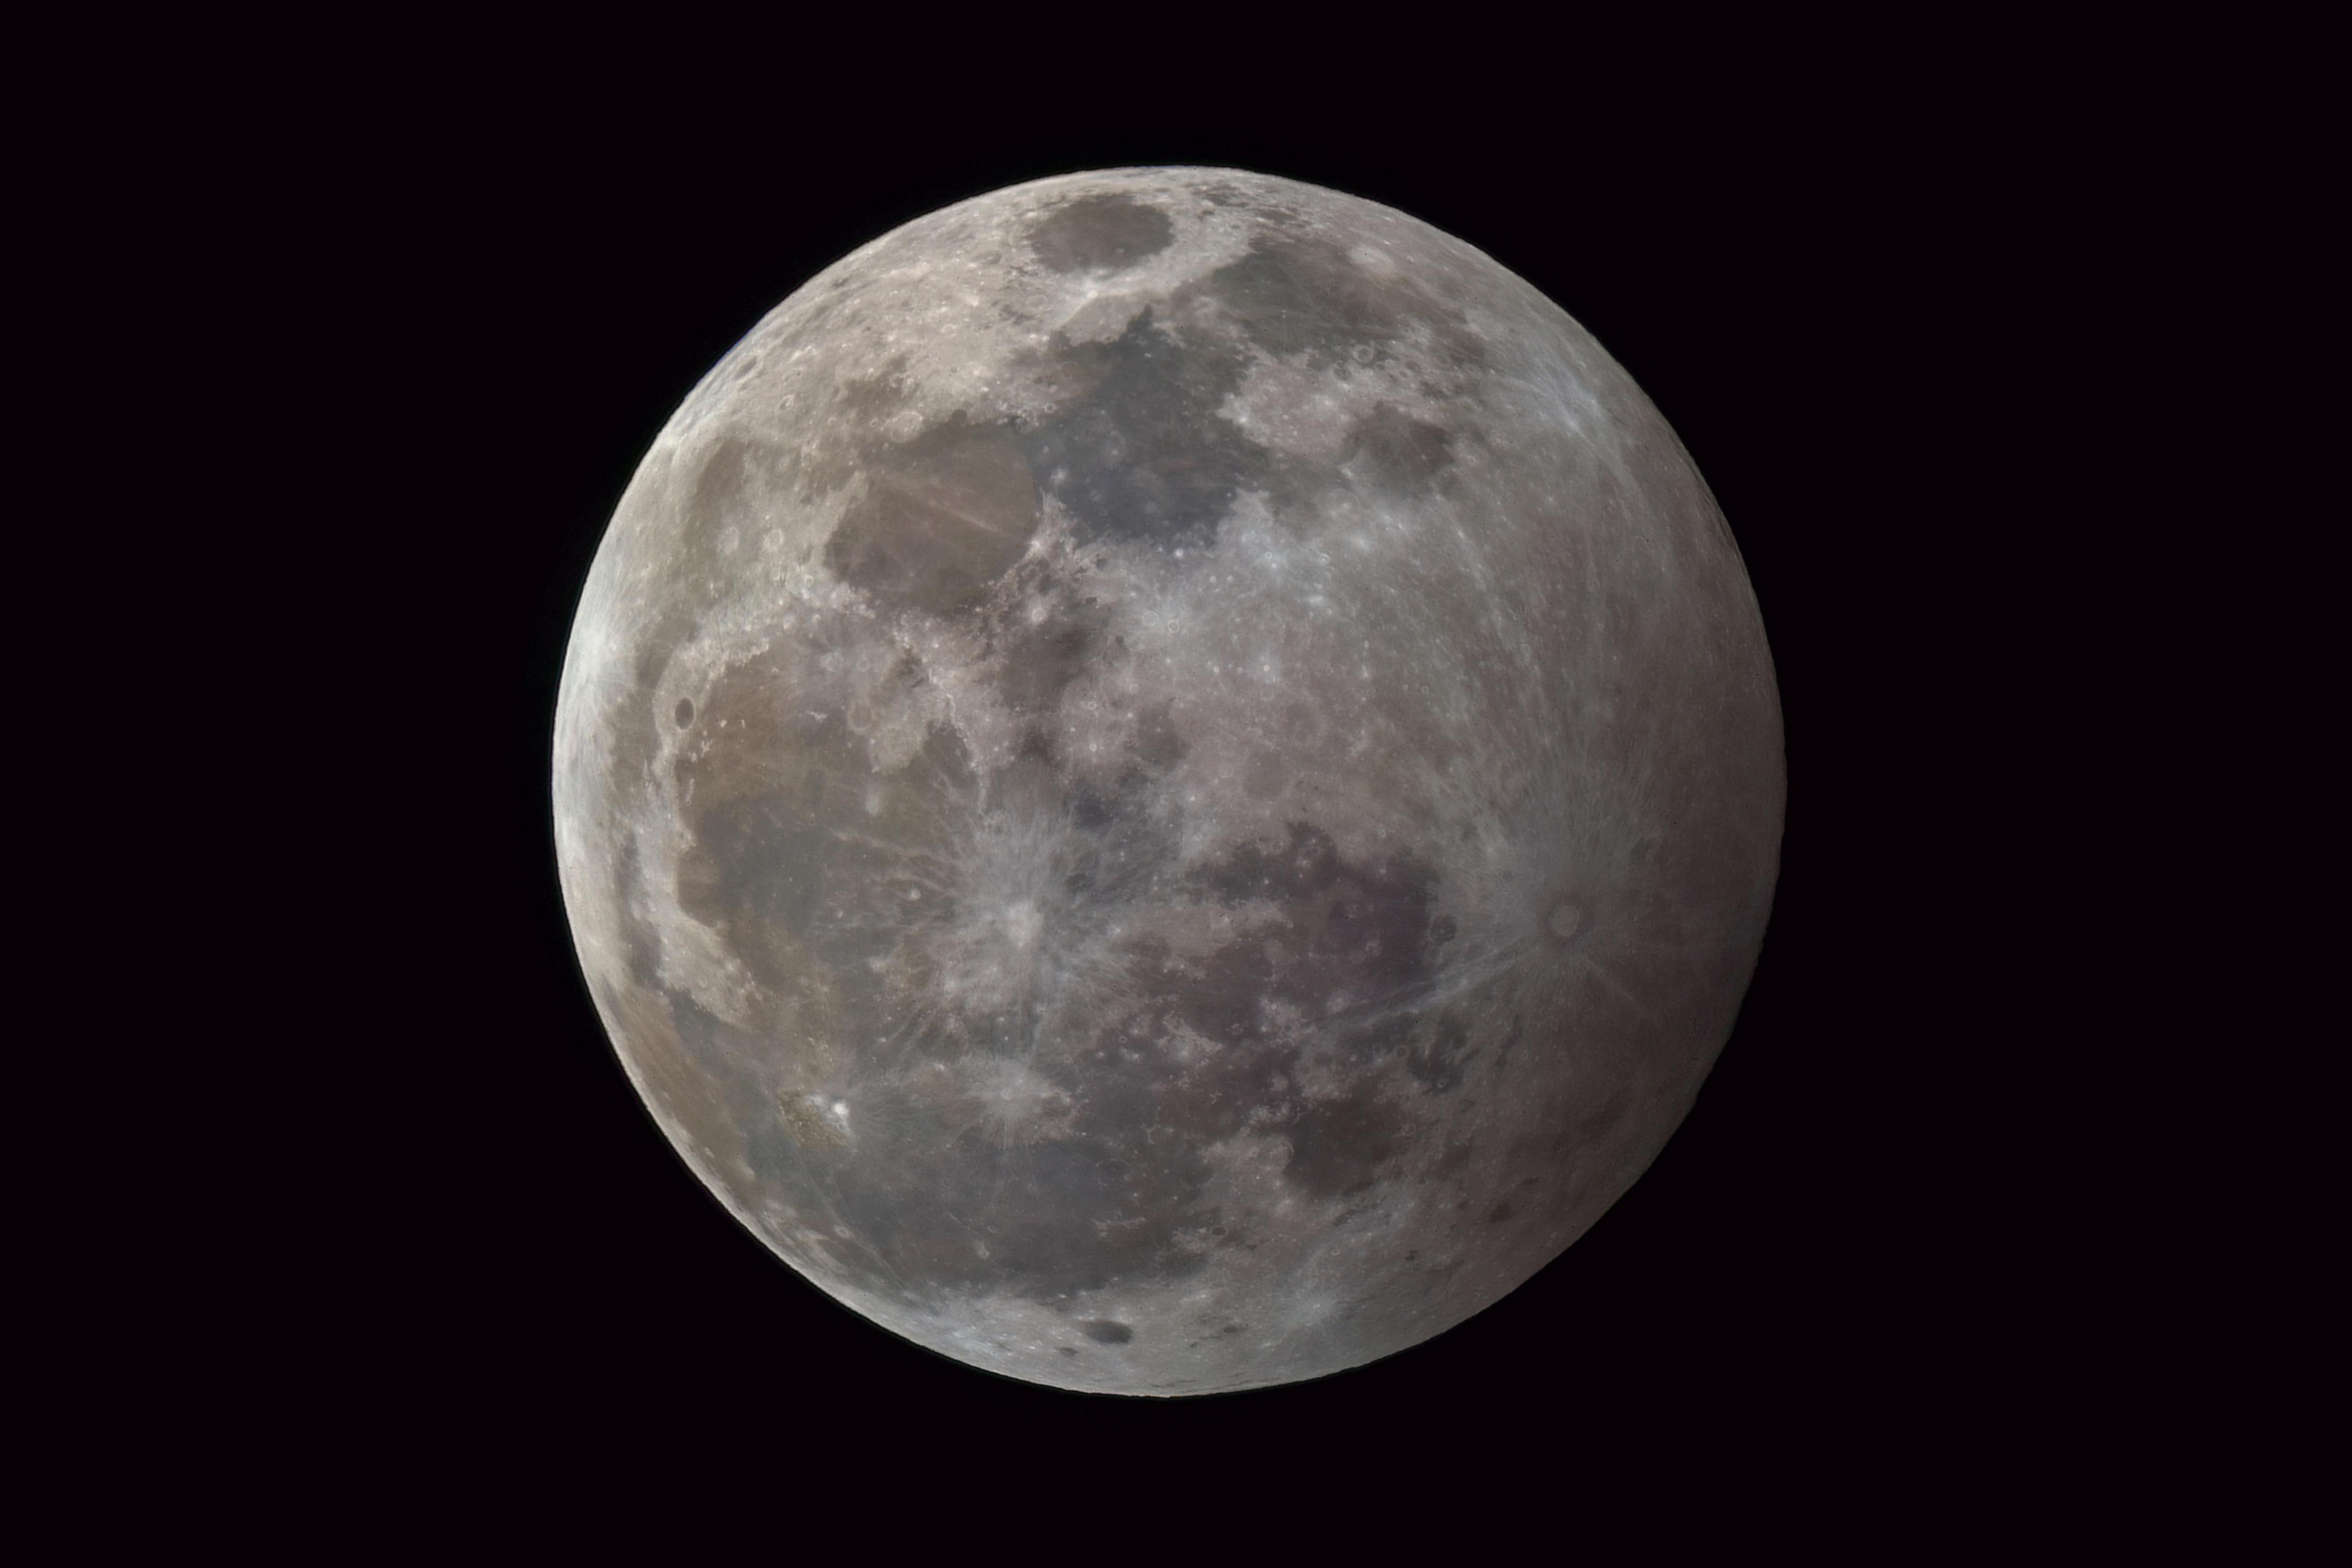 And this diminished effect of the glare and illumination of sunlight on the moon's surface is precisely what regular sky watchers will look to detect during the deepest phase of the eclipse when they focus their gaze toward the lower edge of the moon during the eclipse. maximum phase of Monday's eclipse.  early eclipse.